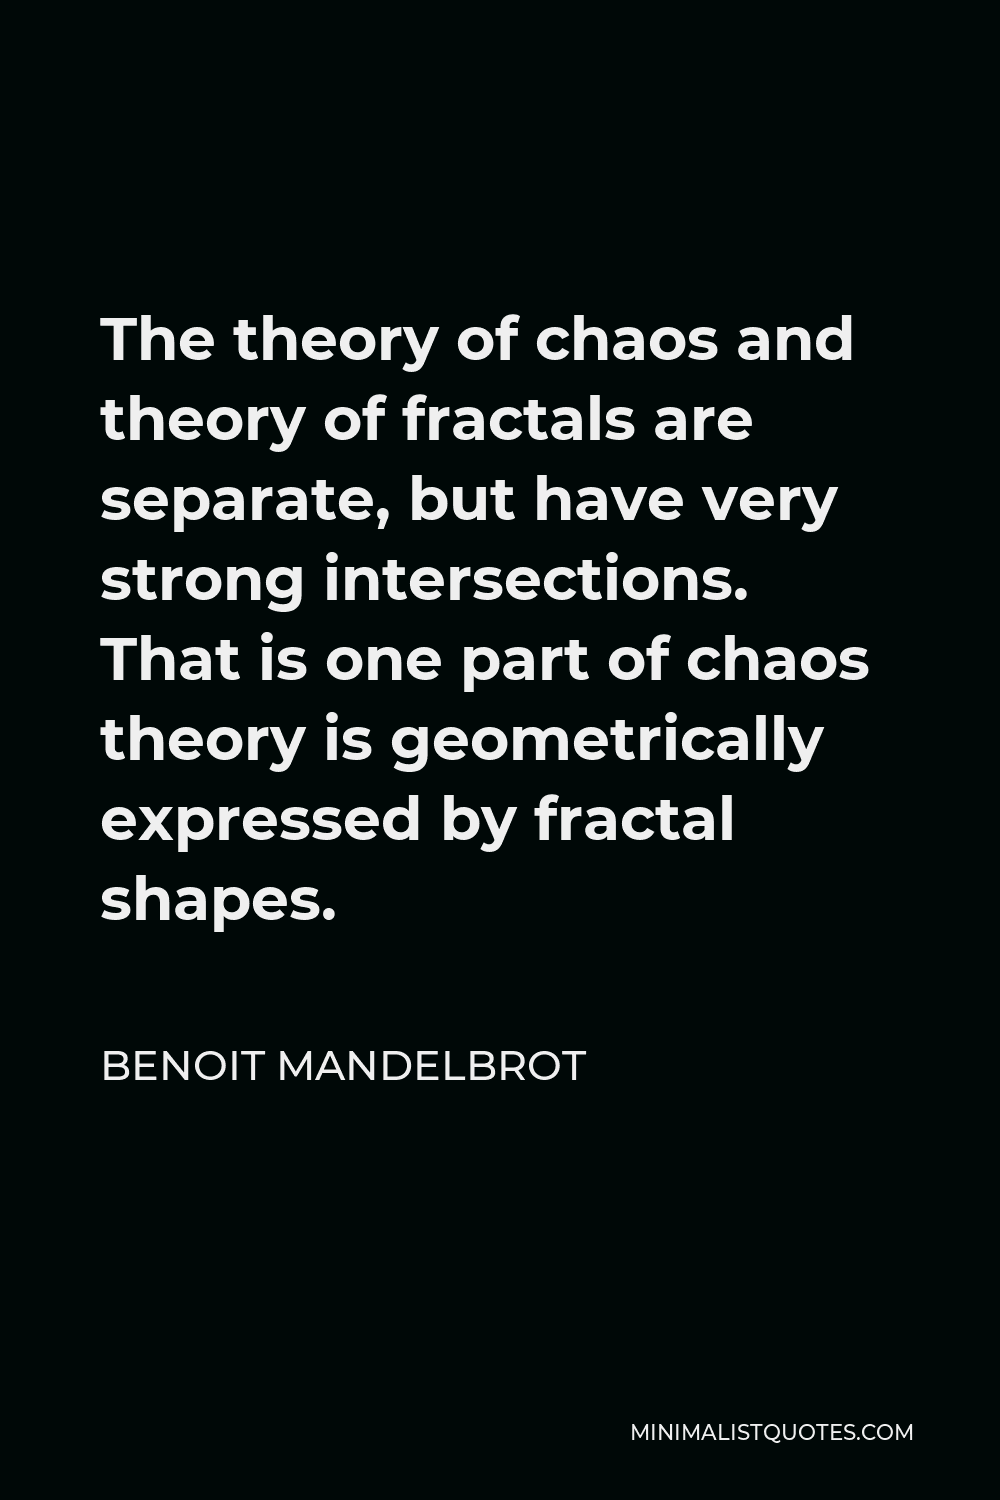 Benoit Mandelbrot Quote - The theory of chaos and theory of fractals are separate, but have very strong intersections. That is one part of chaos theory is geometrically expressed by fractal shapes.